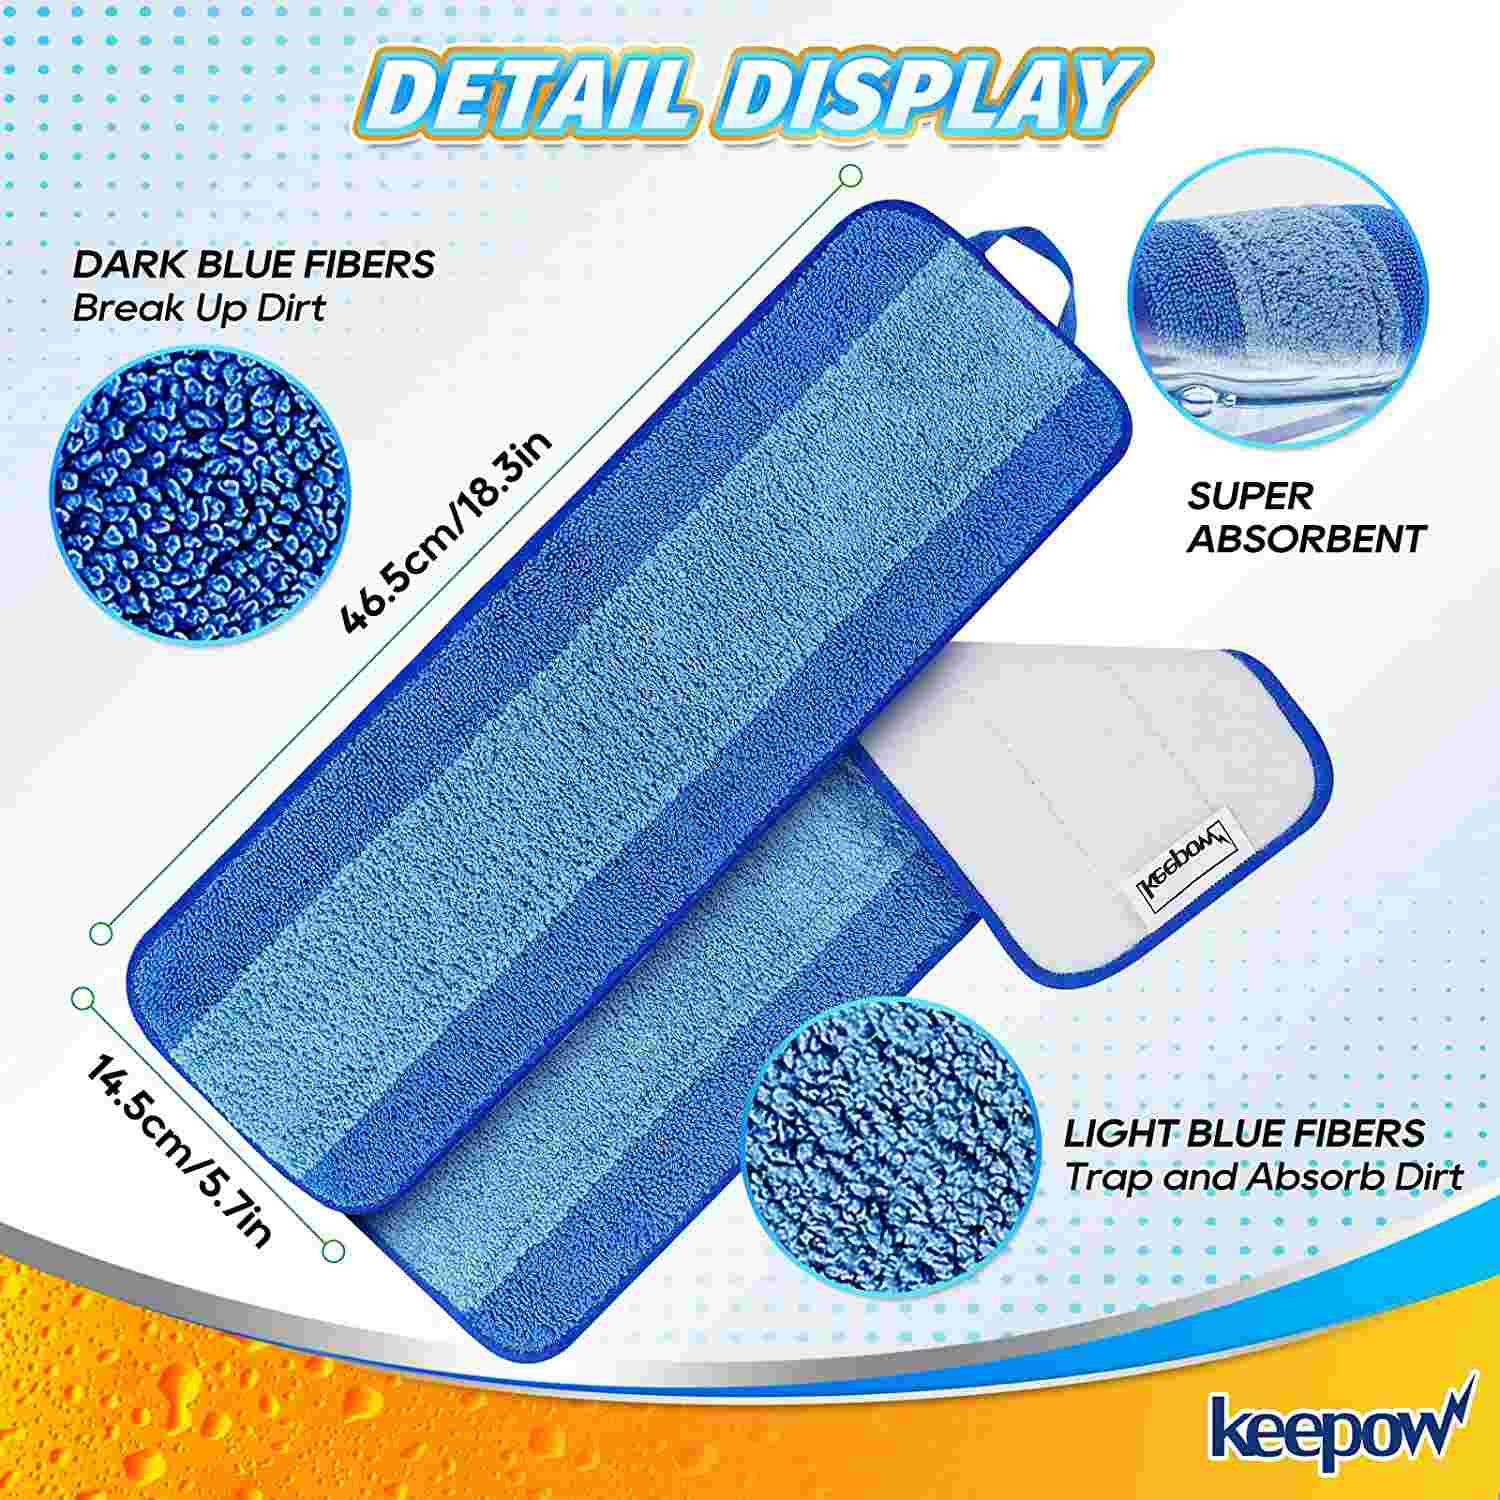 KEEPOW Microfiber Cleaning Pads for Bona Mop, 6 pack